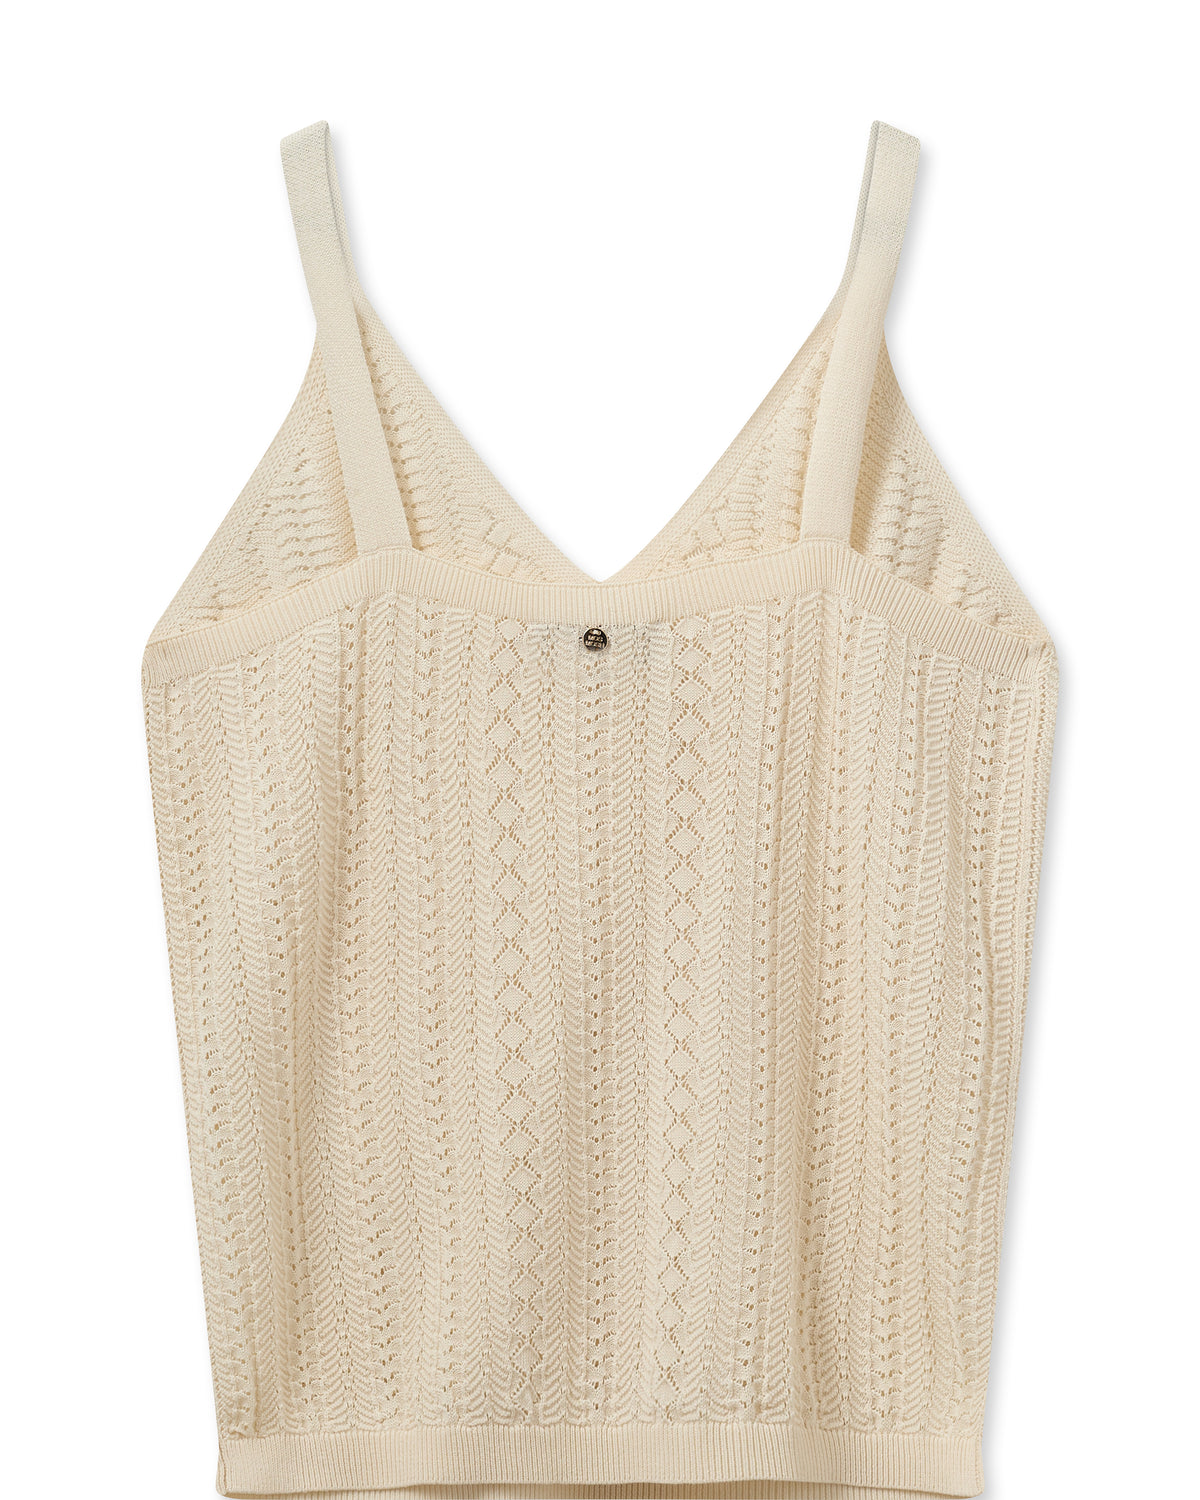 Ecru Cotton knitted vest top rear view